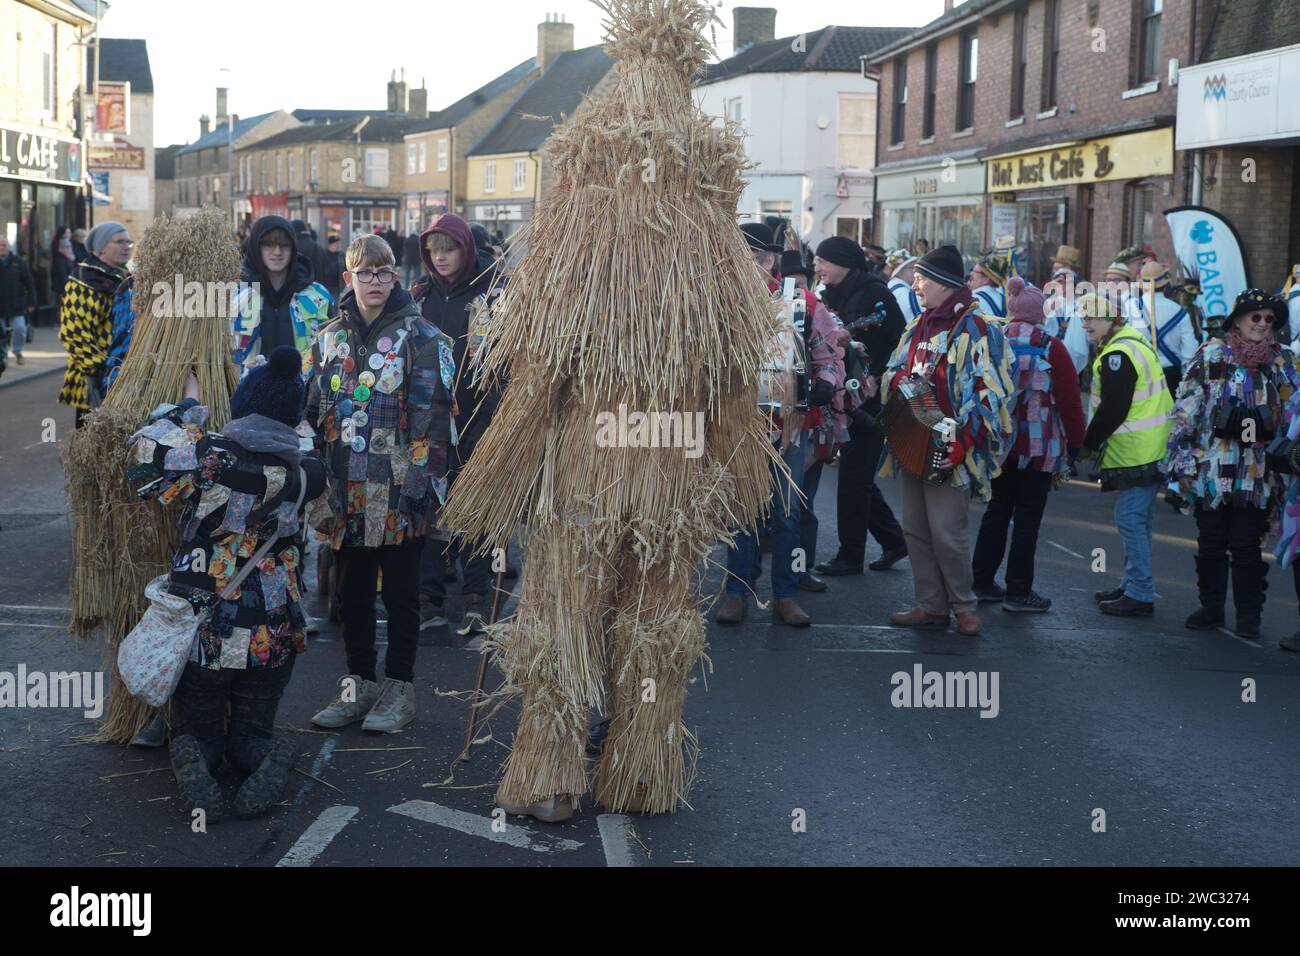 Whittlesey, UK. 13th January 2024. The Whittlesey Straw Bear festival passing through the market town. The event is a tradition that has a 'Straw Bear' (a person dressed in straw) and morris dancers. The traditional event used to took place on the day local farm workers returned to work, also known as Plough Monday. Andrew Steven Graham/Alamy Live News Stock Photo